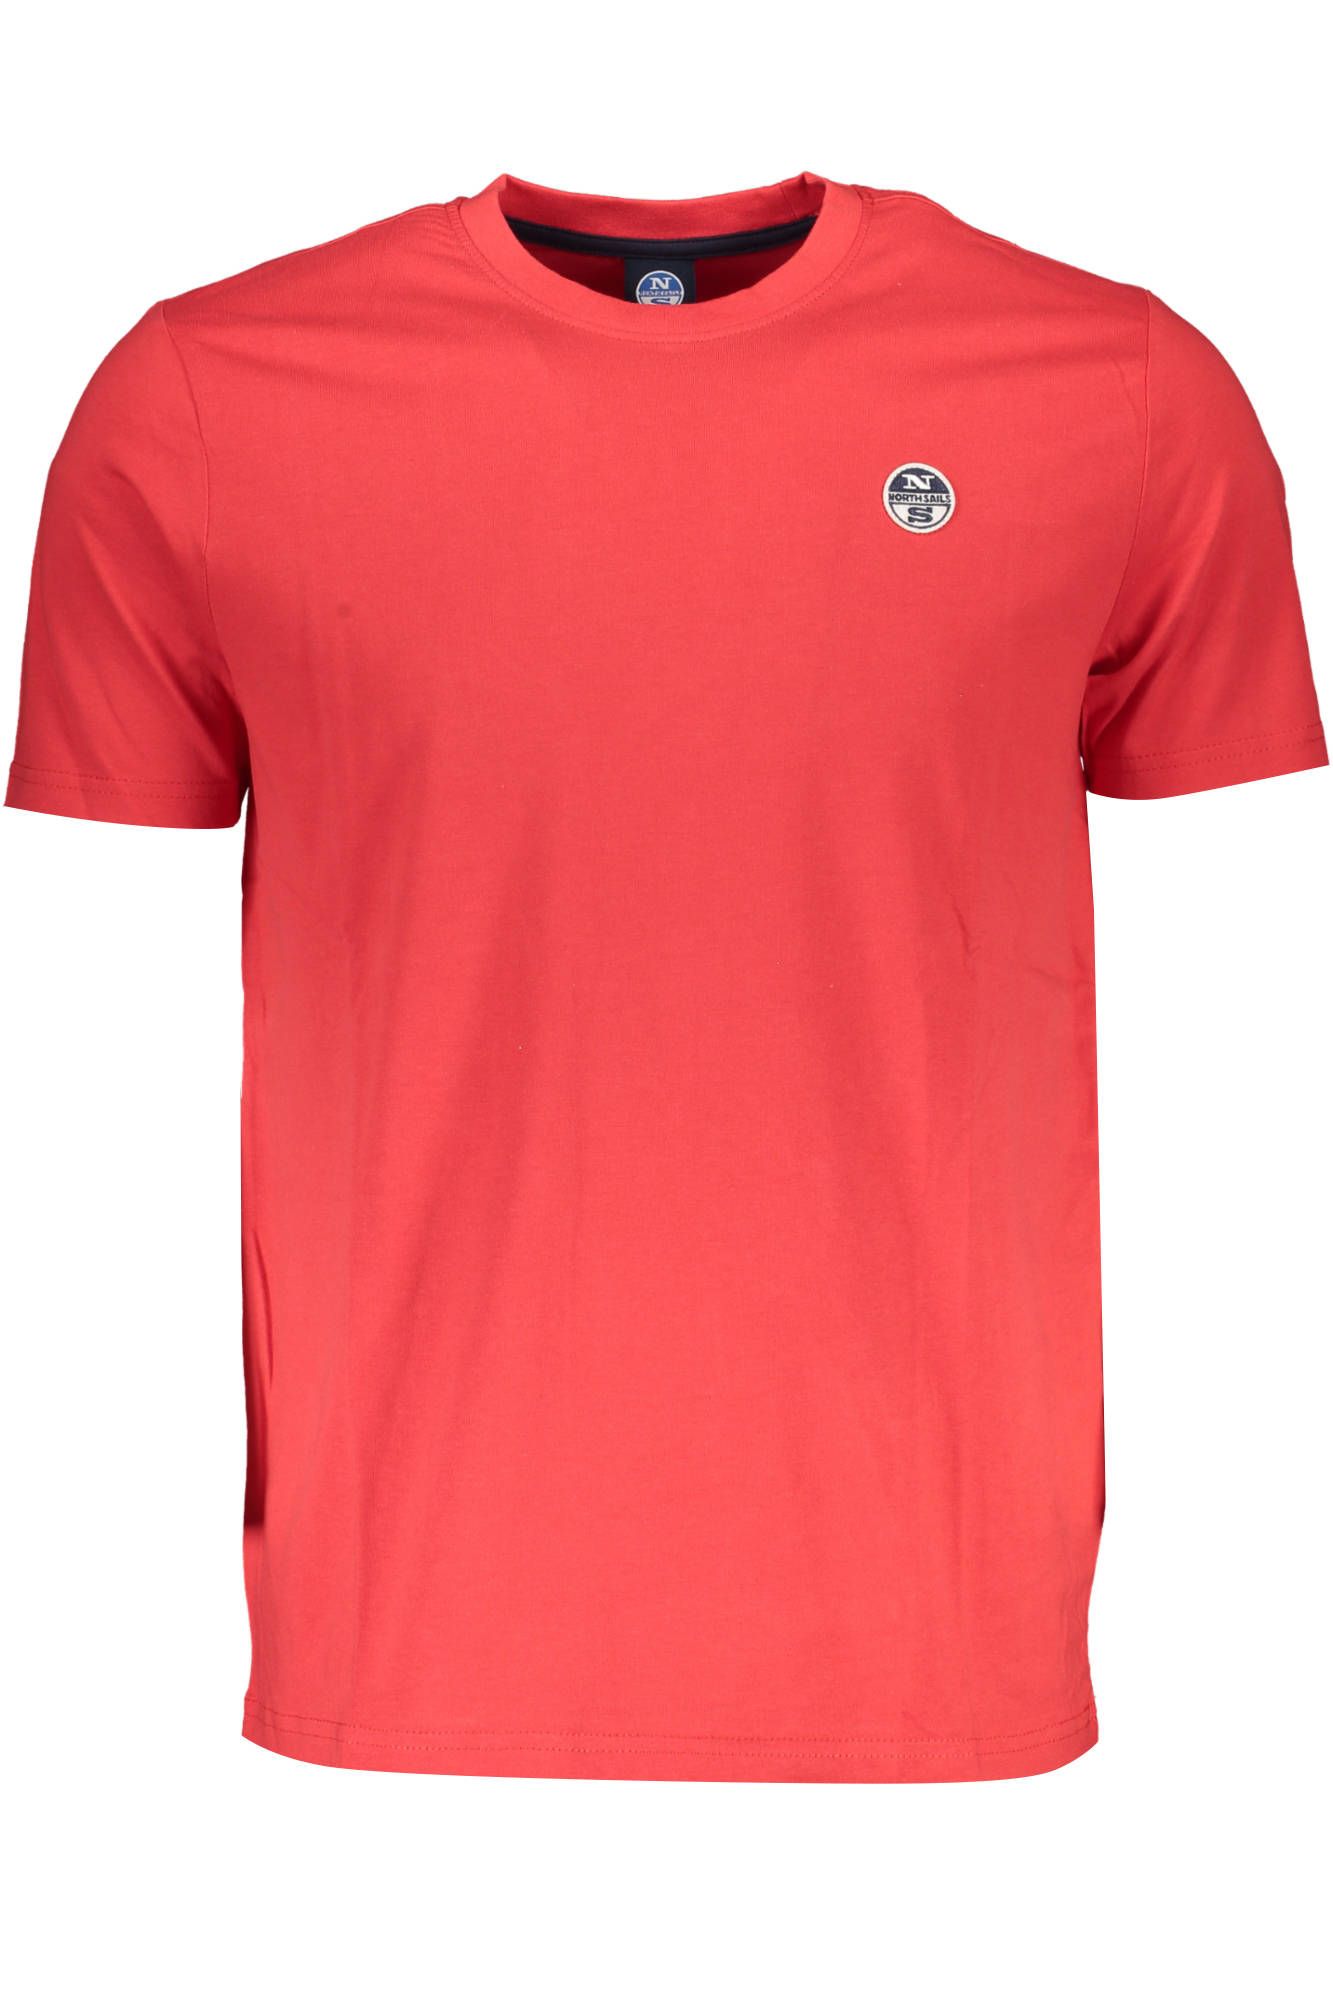 North Sails Vibrant Red Round Neck Tee with Logo Detail